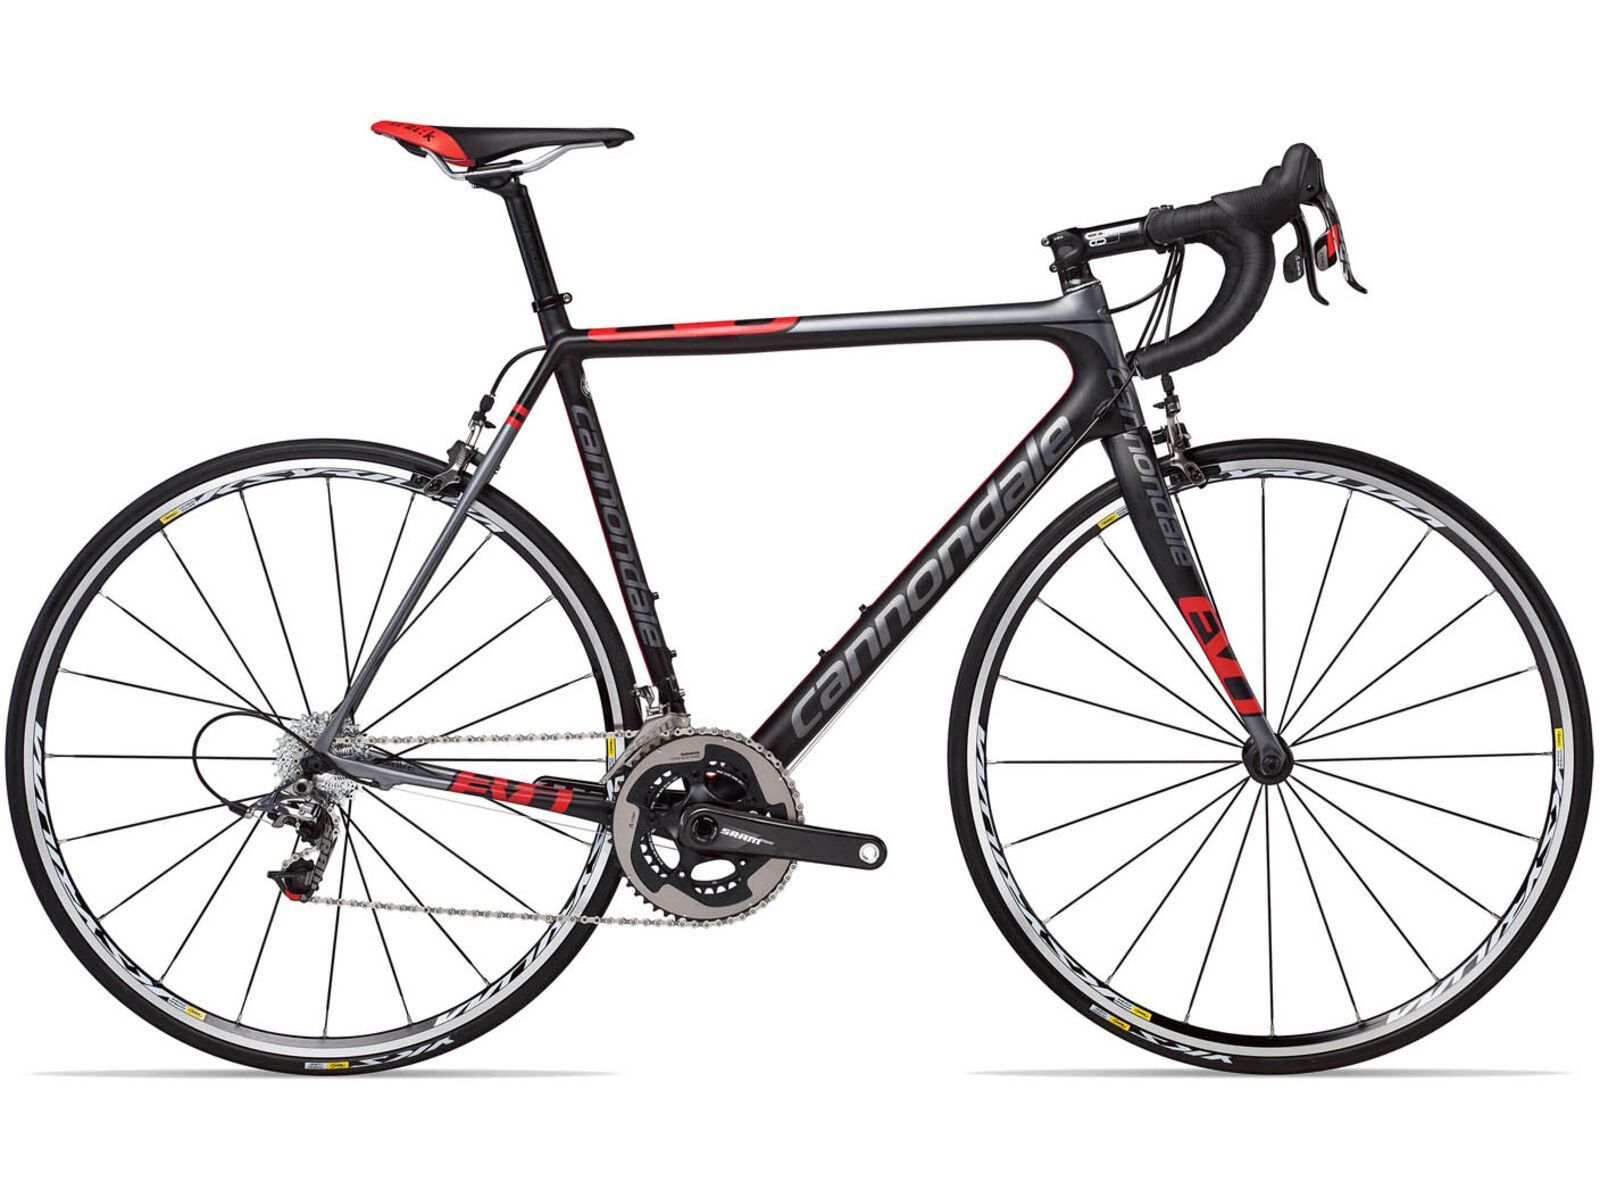 *** 2. Wahl *** Cannondale SuperSix Evo 2 Red 2013, exposed carbon w/ charcoal gray matte - Rennrad | Rahmenhöhe 58 cm | Bild 1